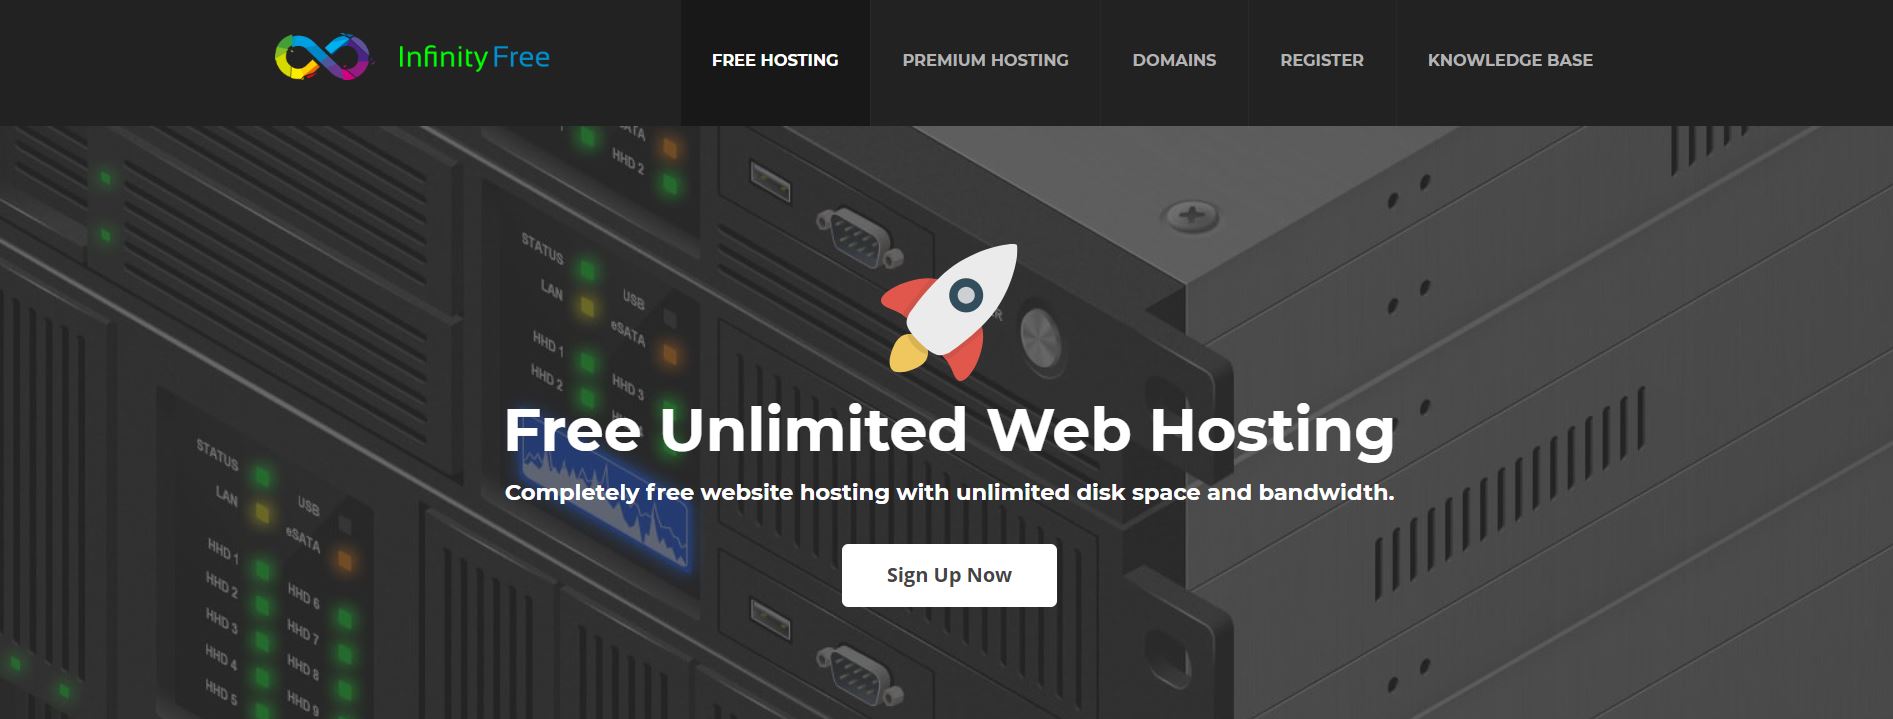 InfinityFree - Free Web Hosting with Domain